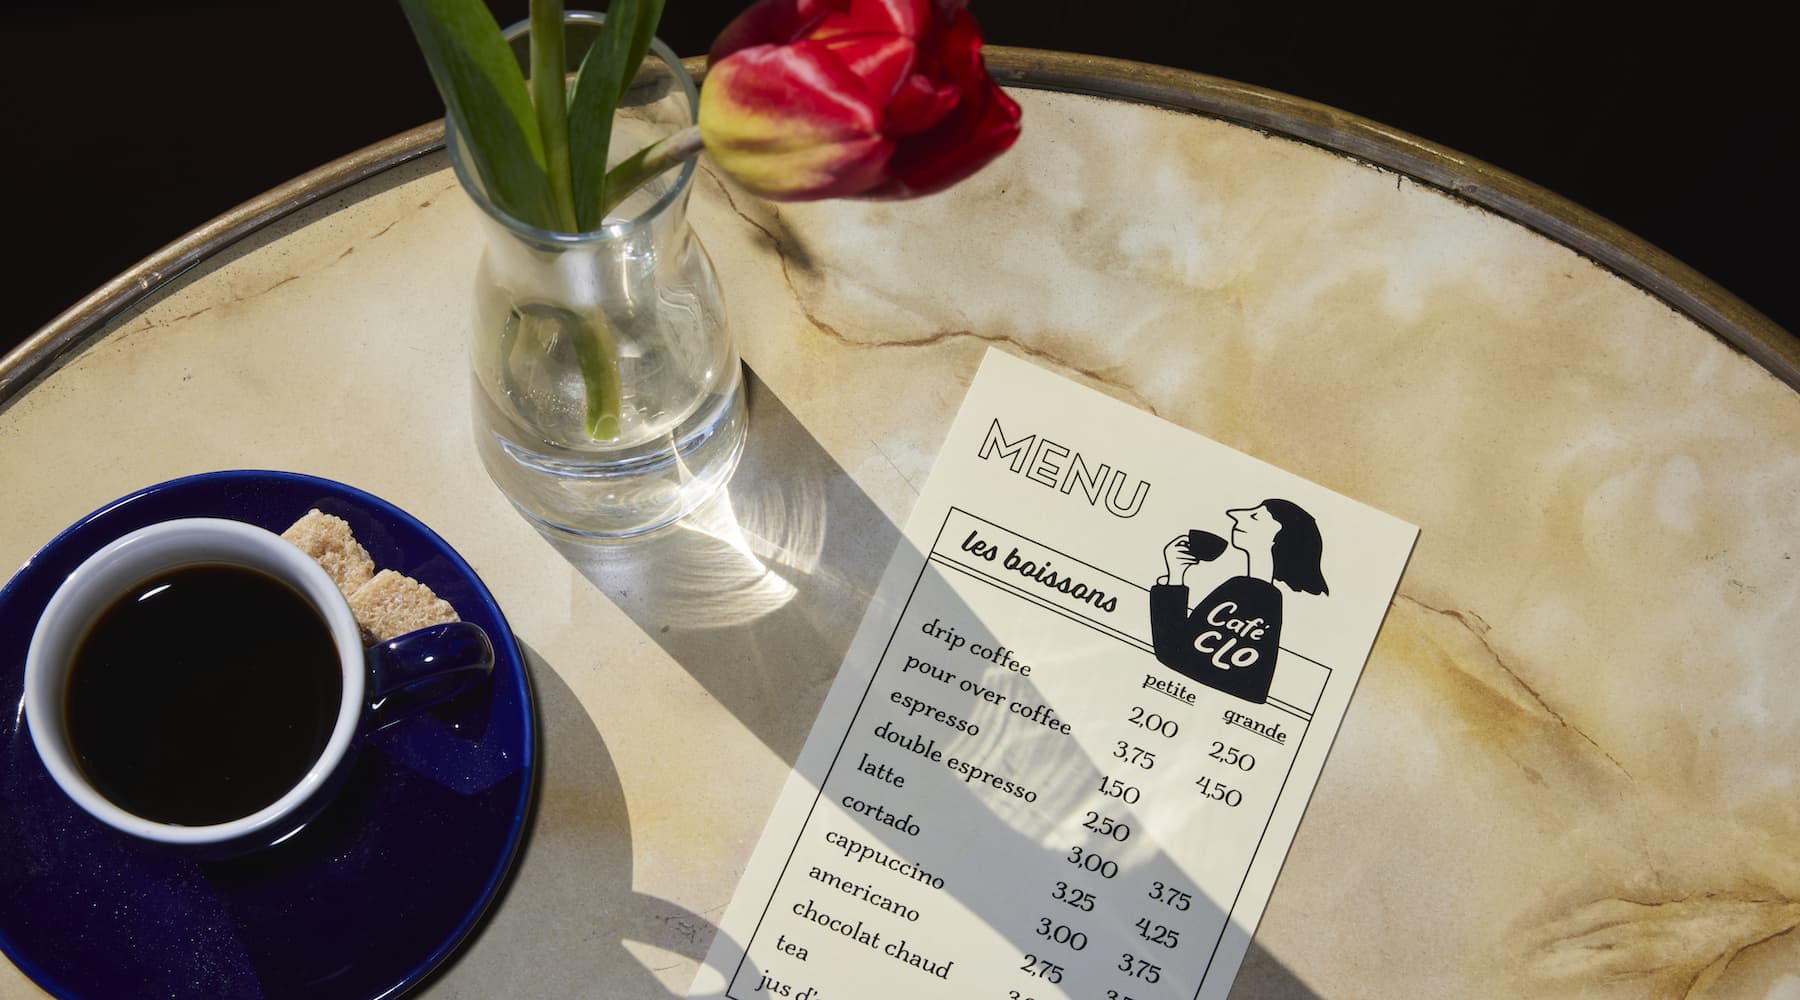 A branded cafe menu on a table